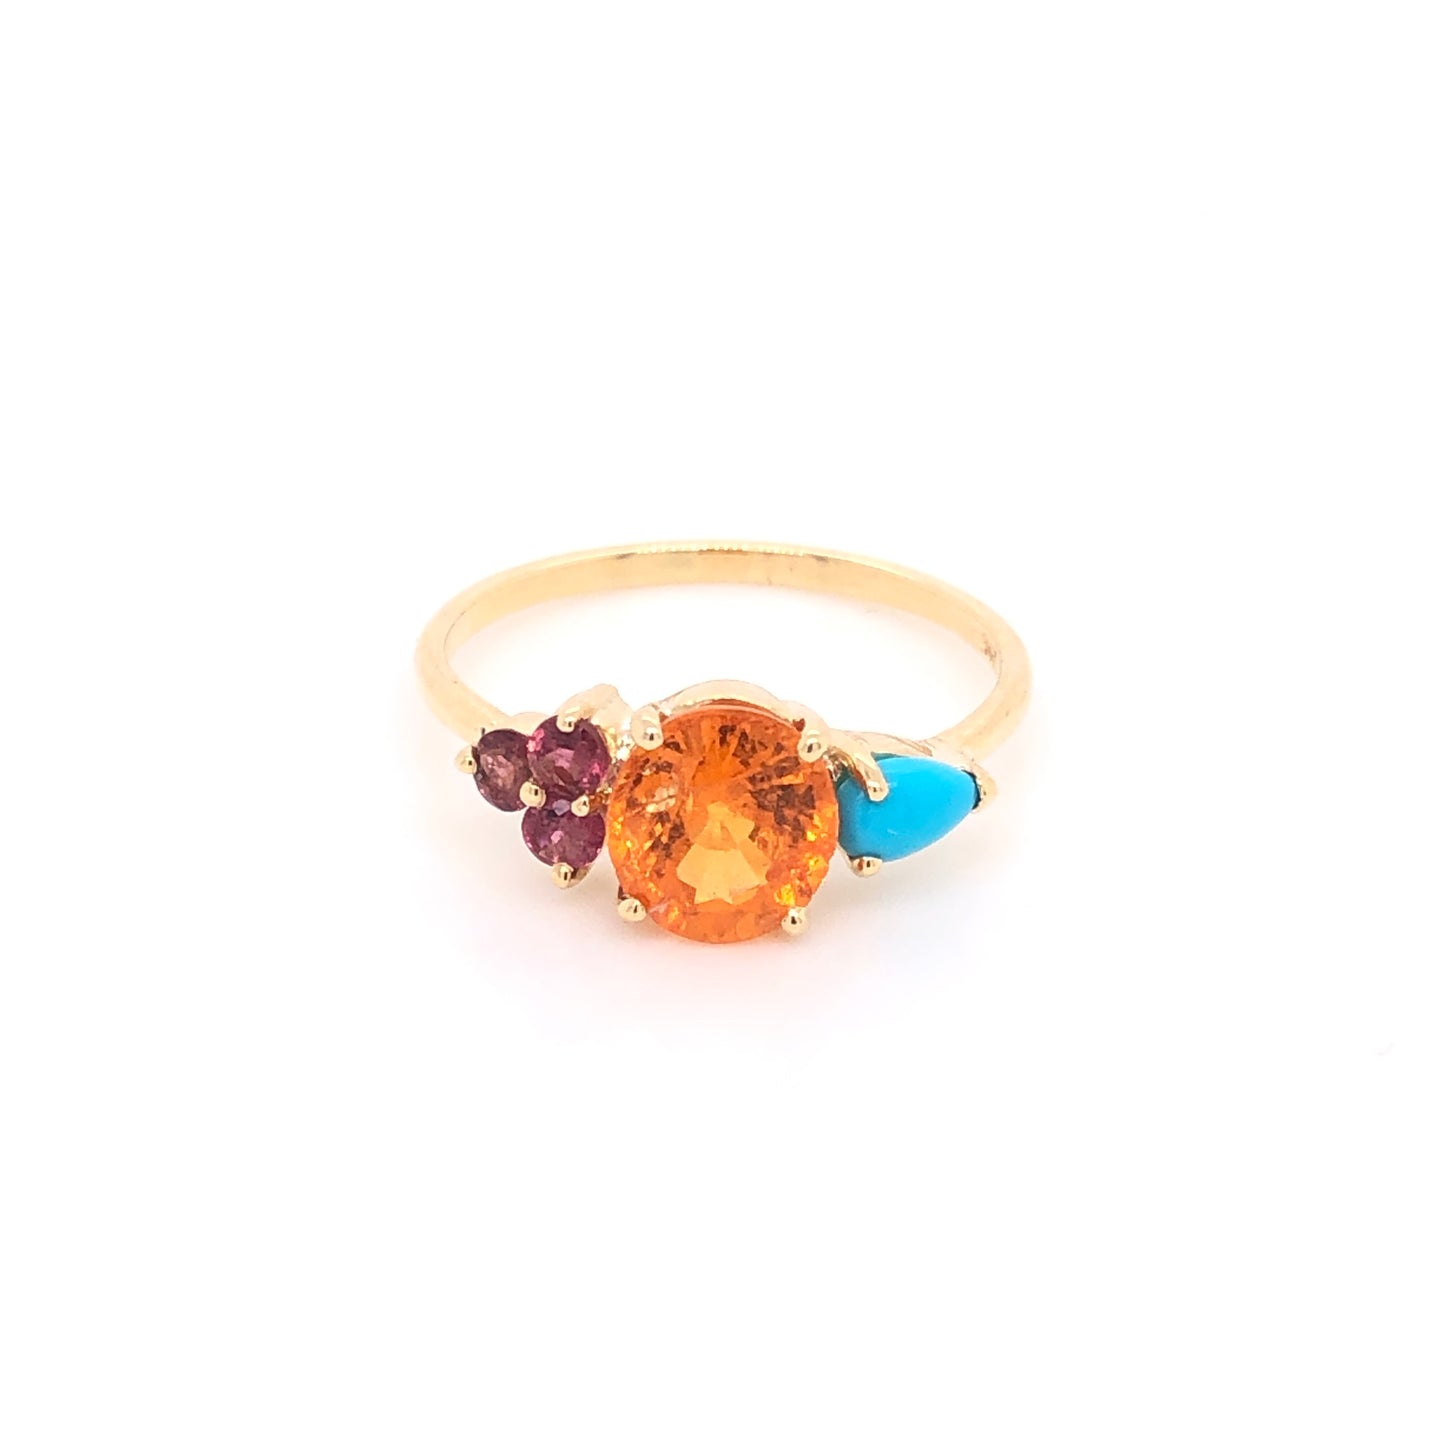 Mandarin Garnet Ring with Turquoise and Tourmalines